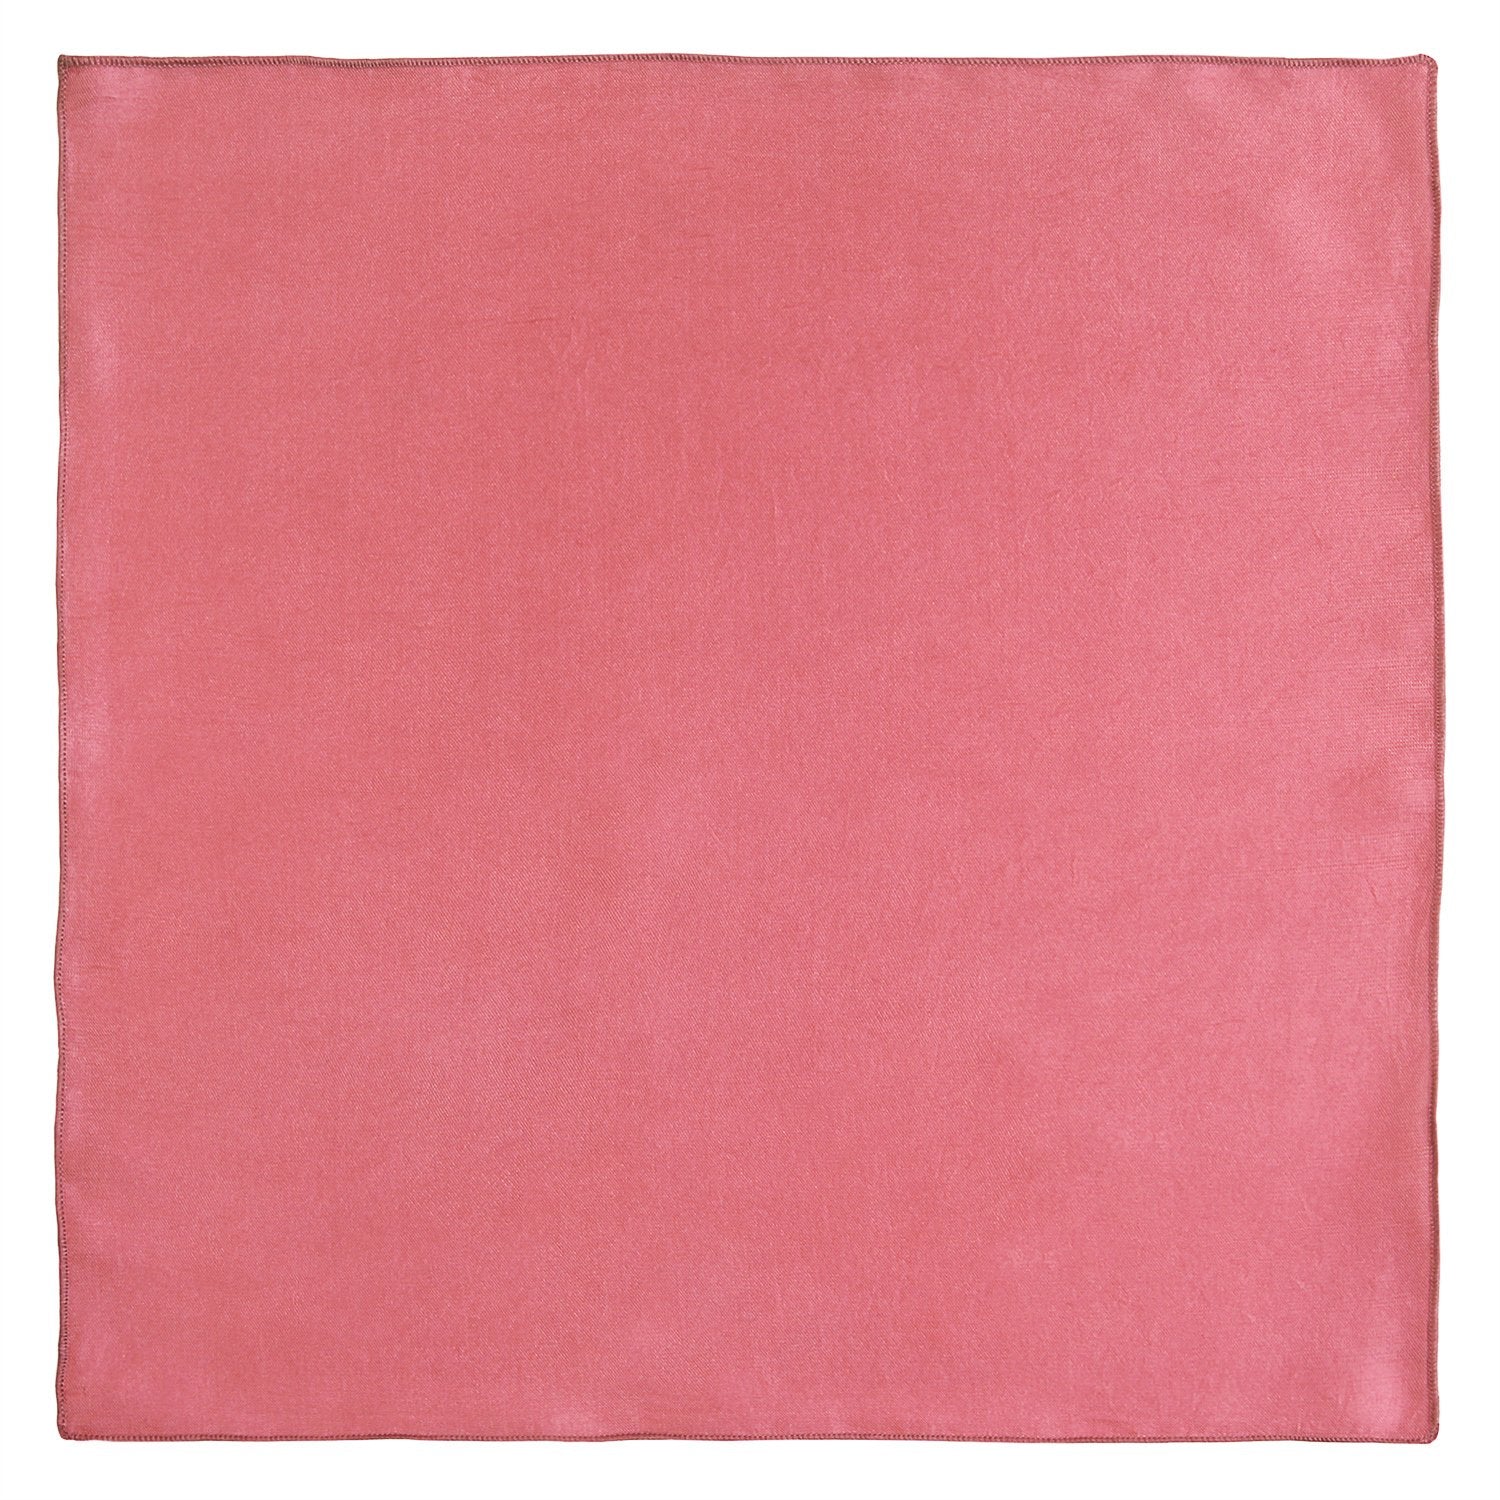 Chokore Old Rose Pure Silk Pocket Square, from the Solids Line